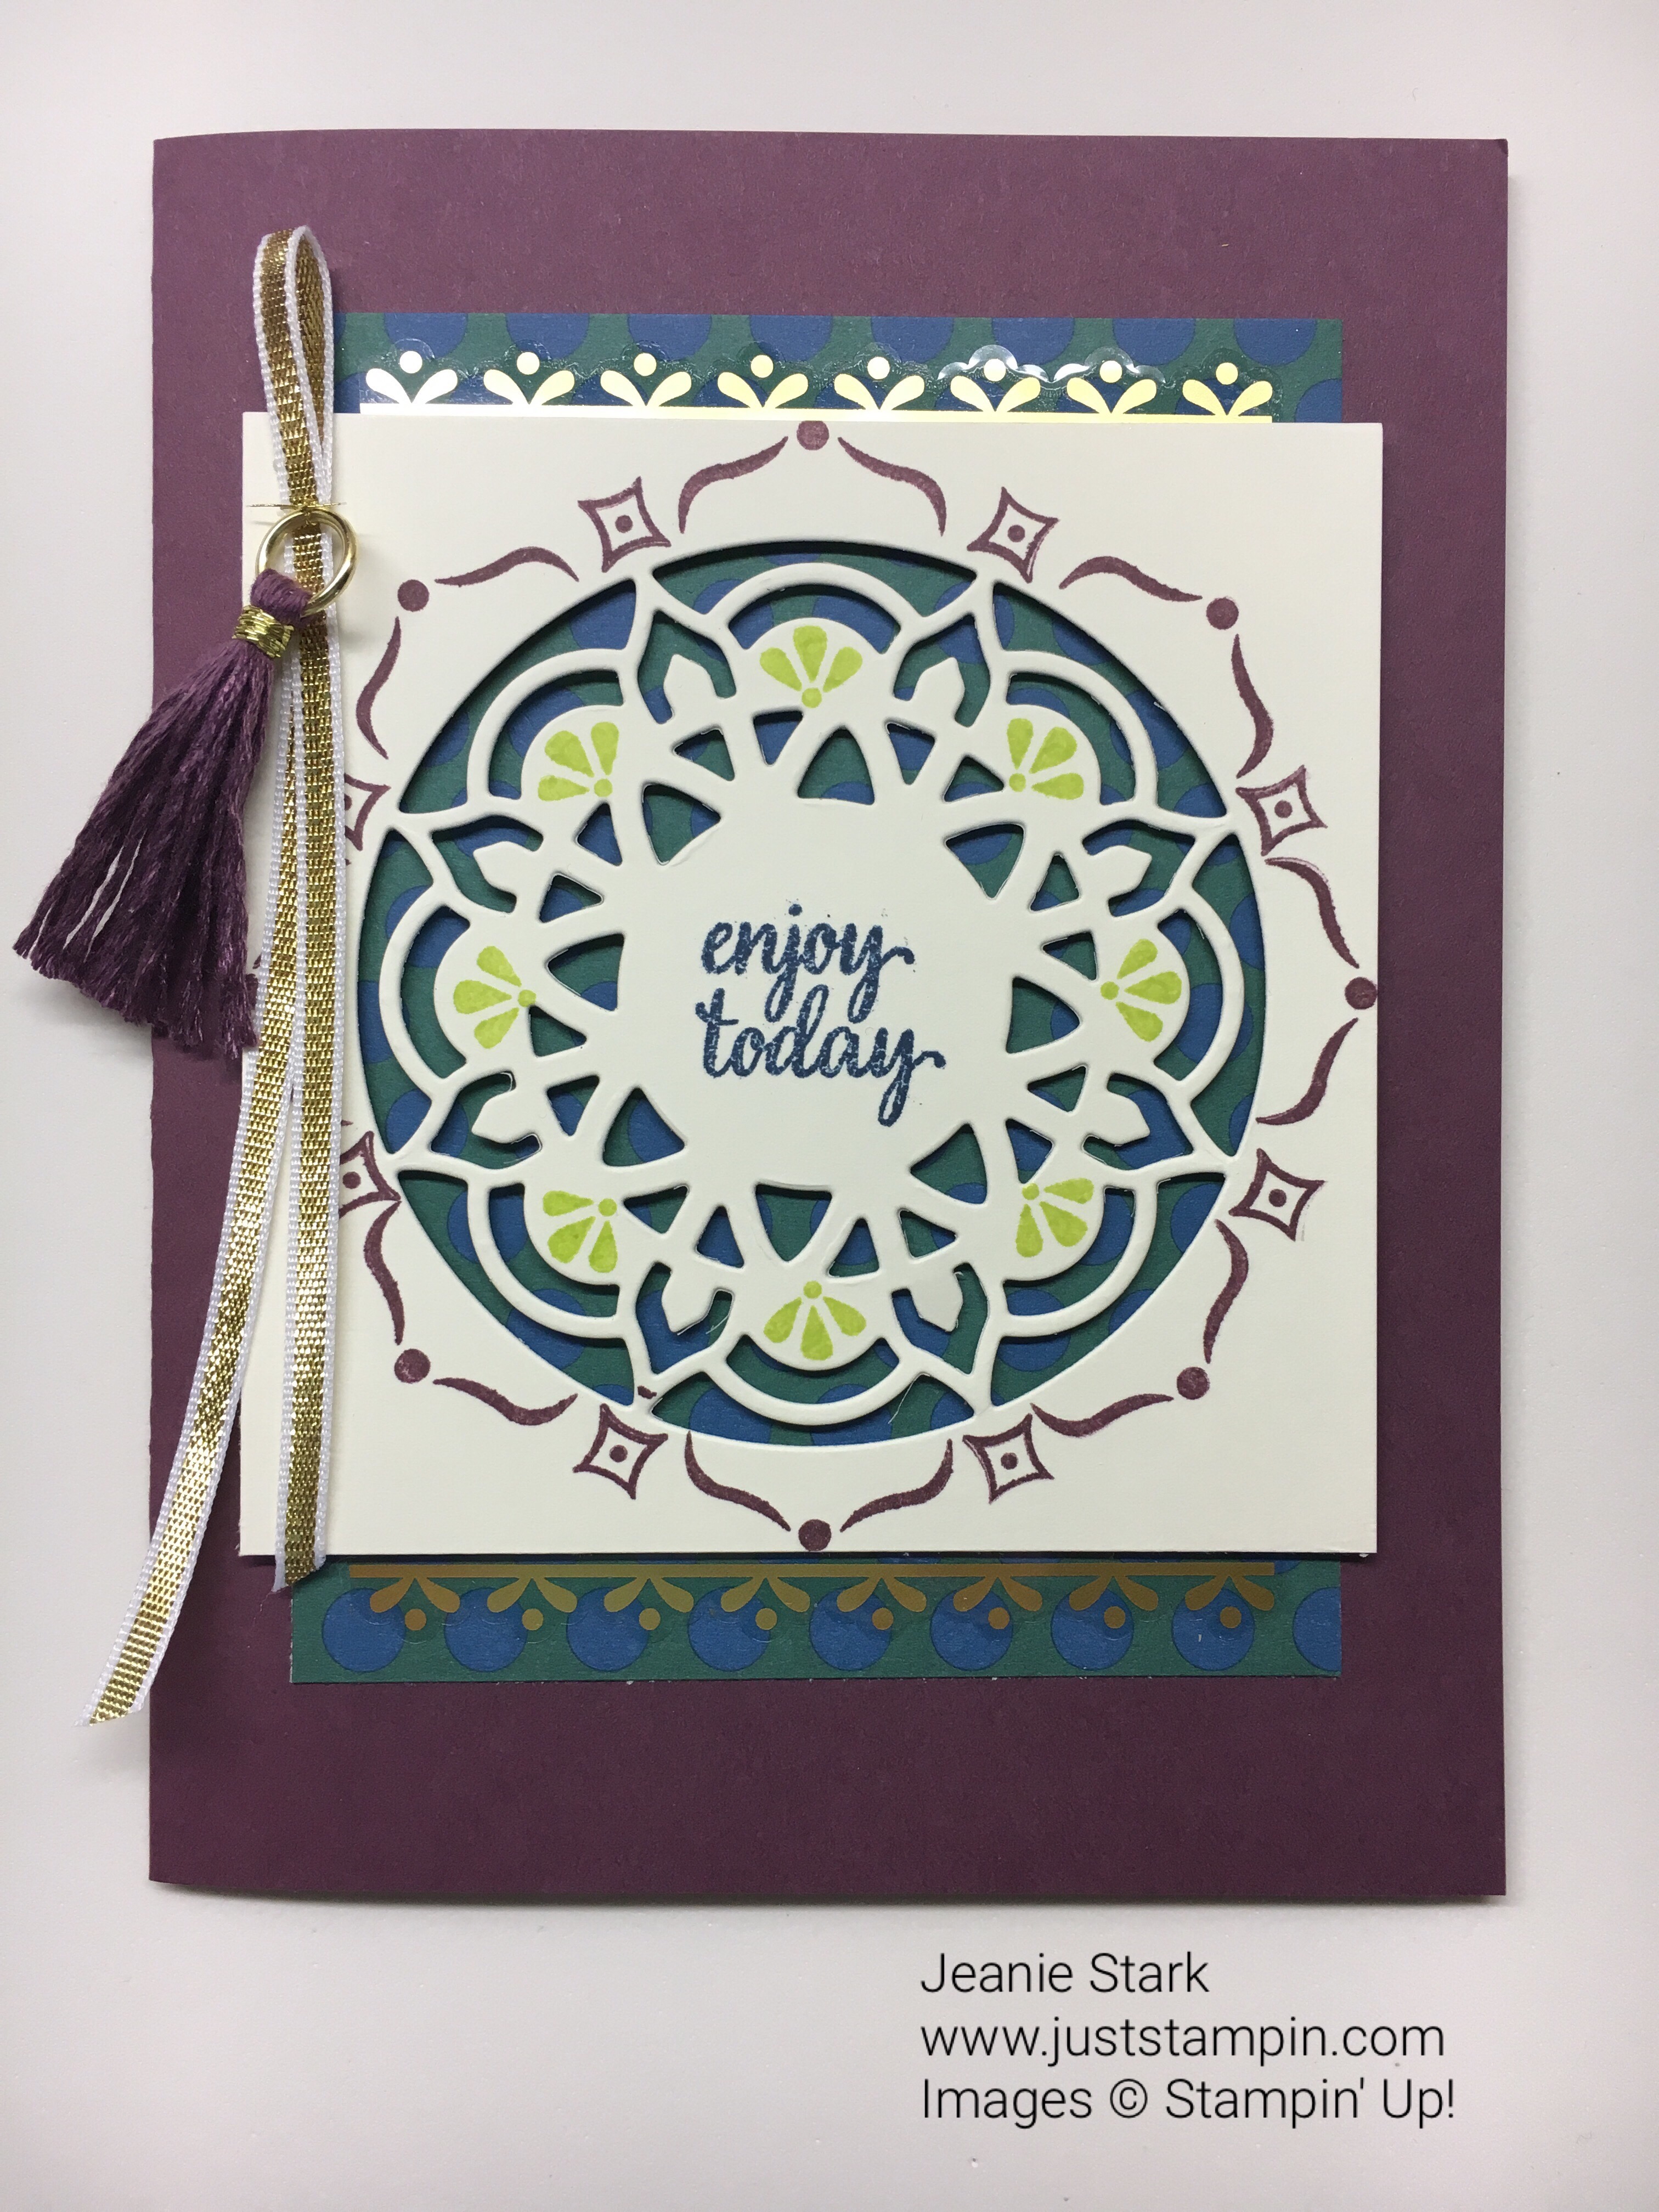 Stampin Up Eastern Palace suite All Occasion Card idea -Jeanie Stark StampinUp